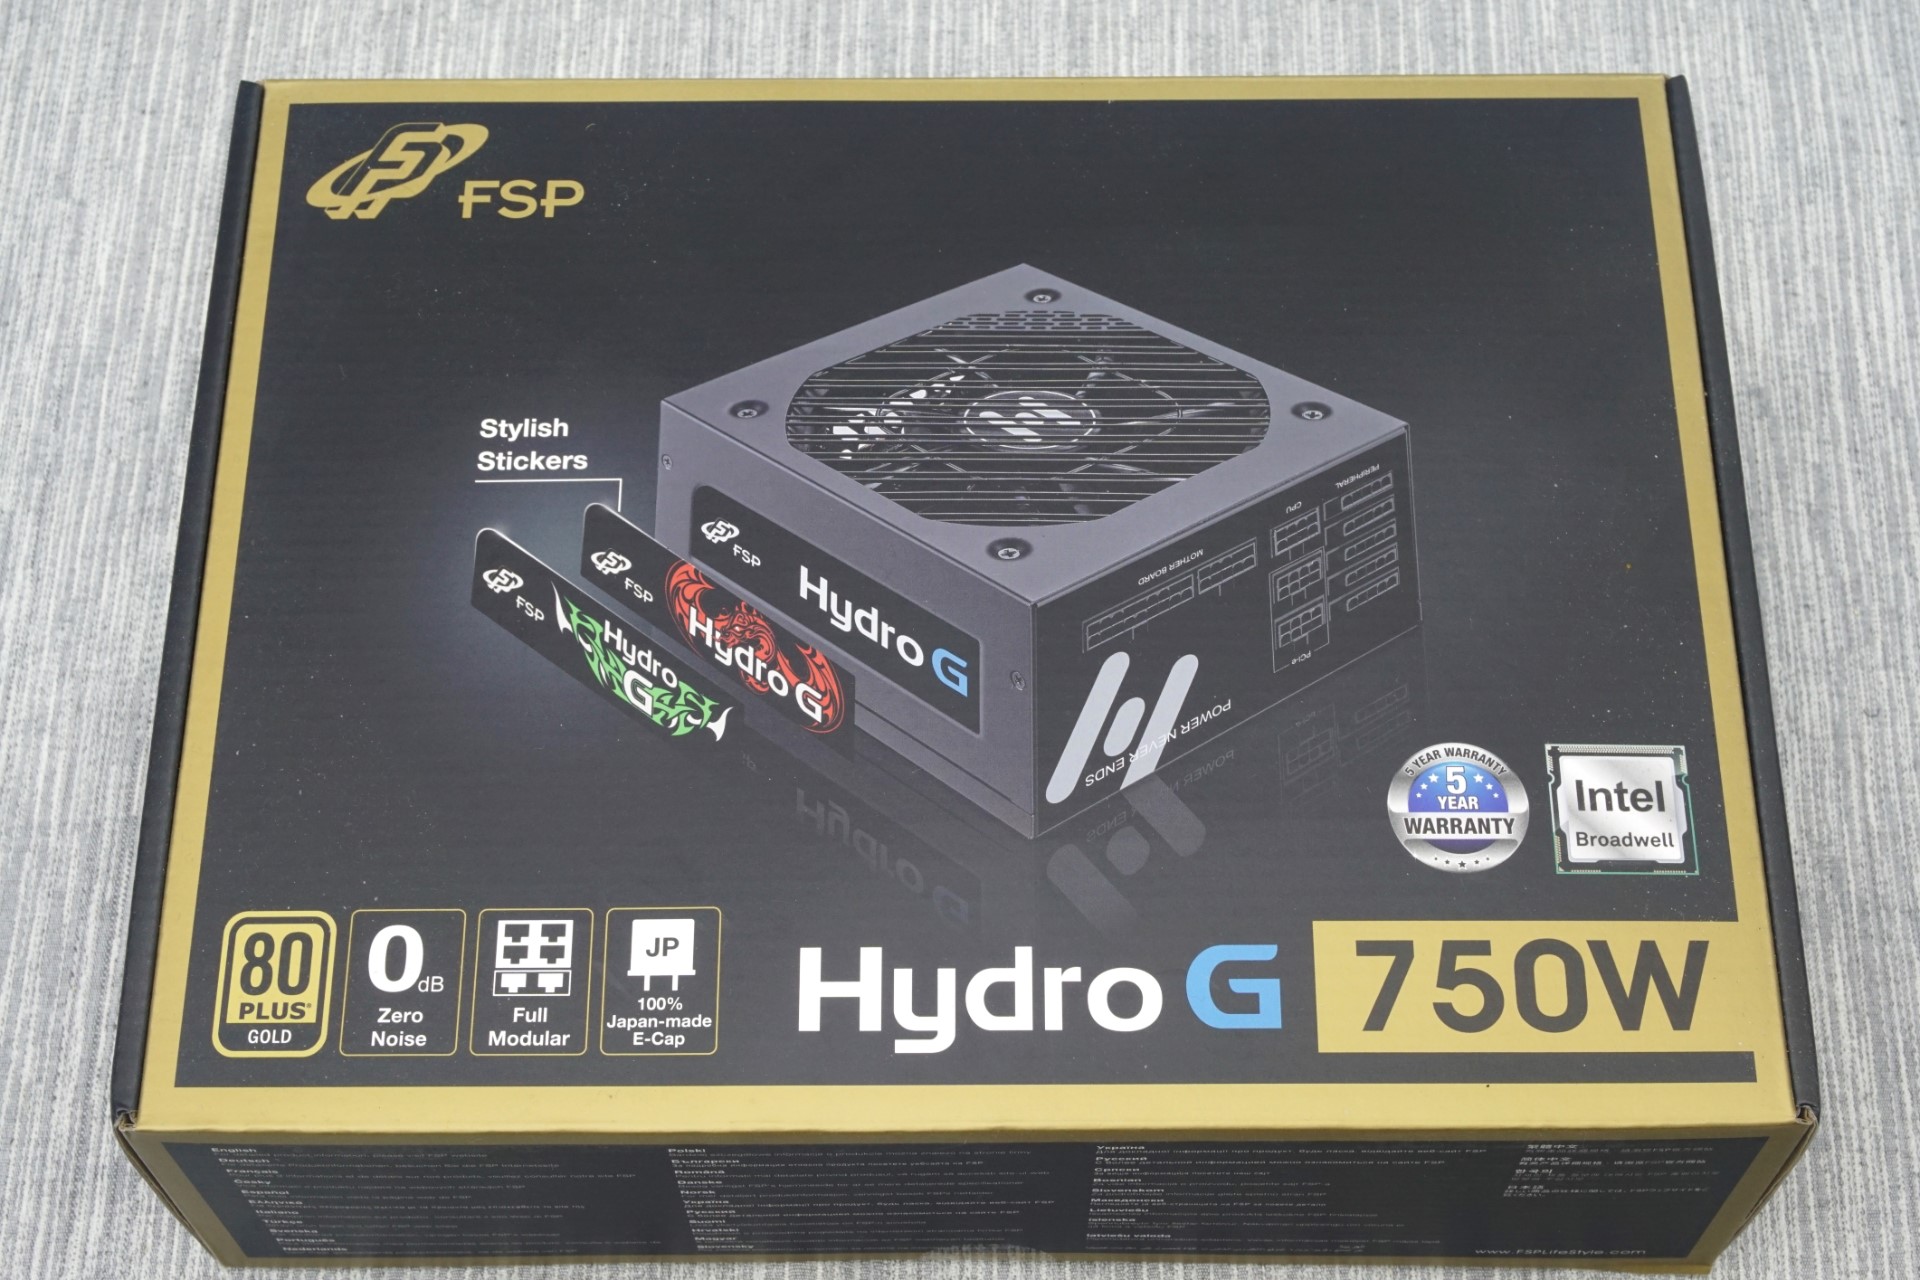 jævnt Odysseus Omhyggelig læsning The FSP Hydro G 750W Power Supply Review